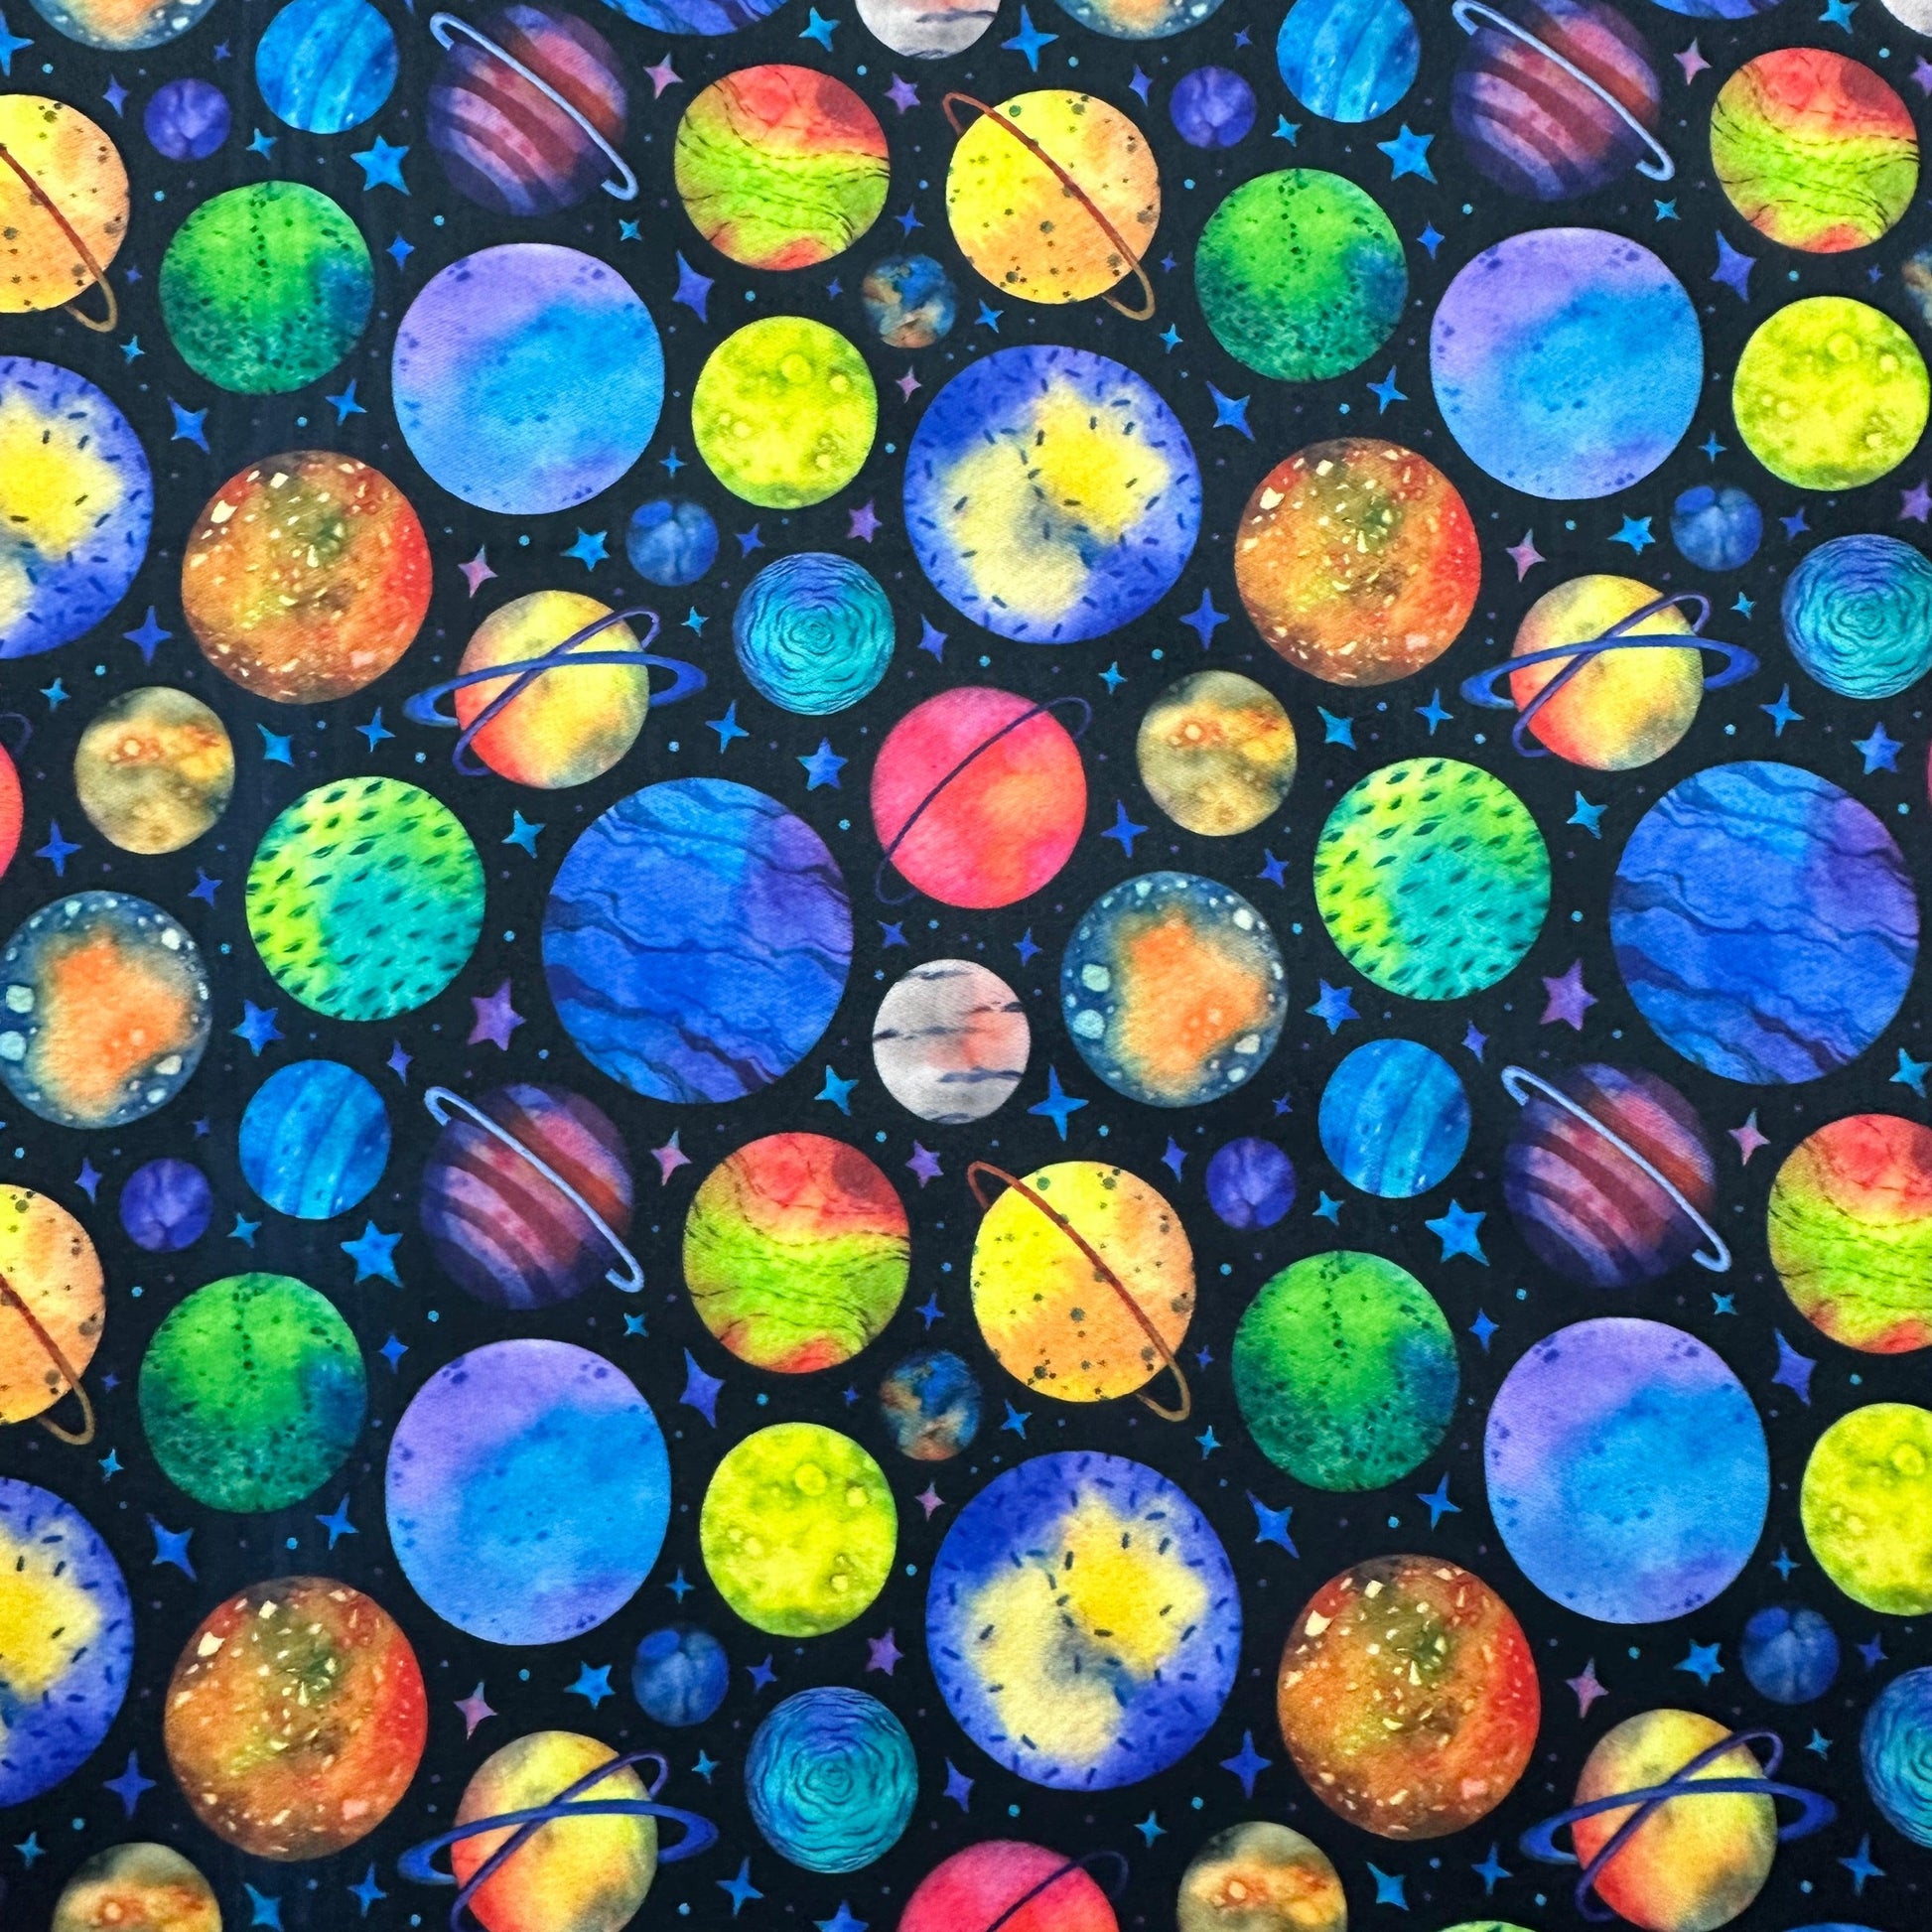 Rainbow Planets on Black 1 mil PUL Fabric - Made in the USA - Nature's Fabrics